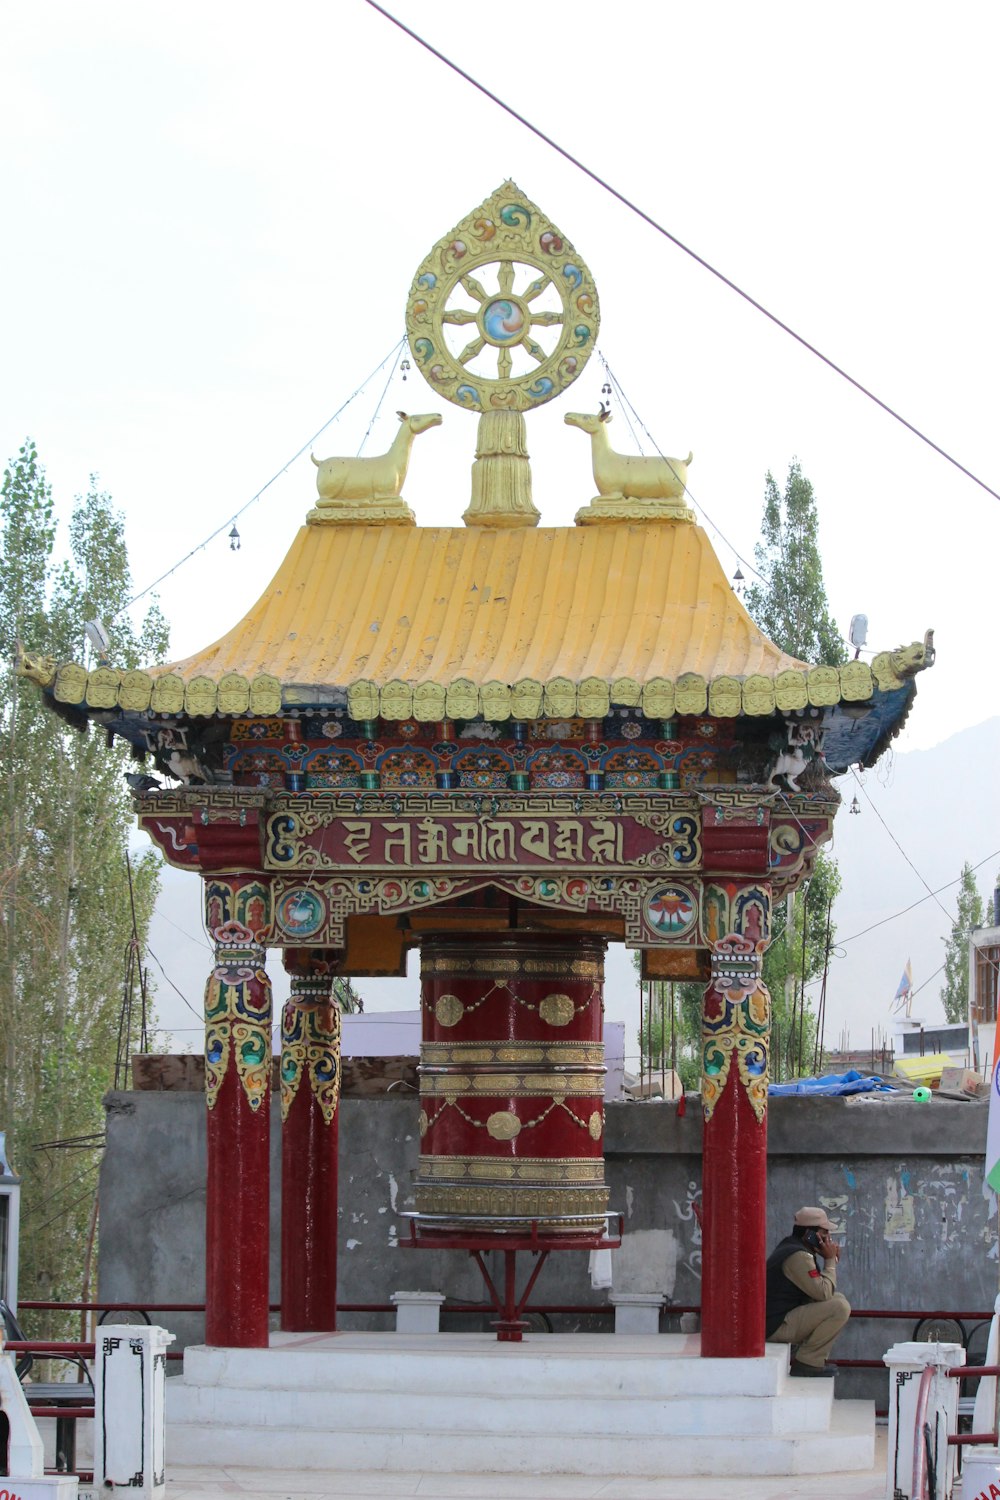 a red and yellow structure with a clock on top of it